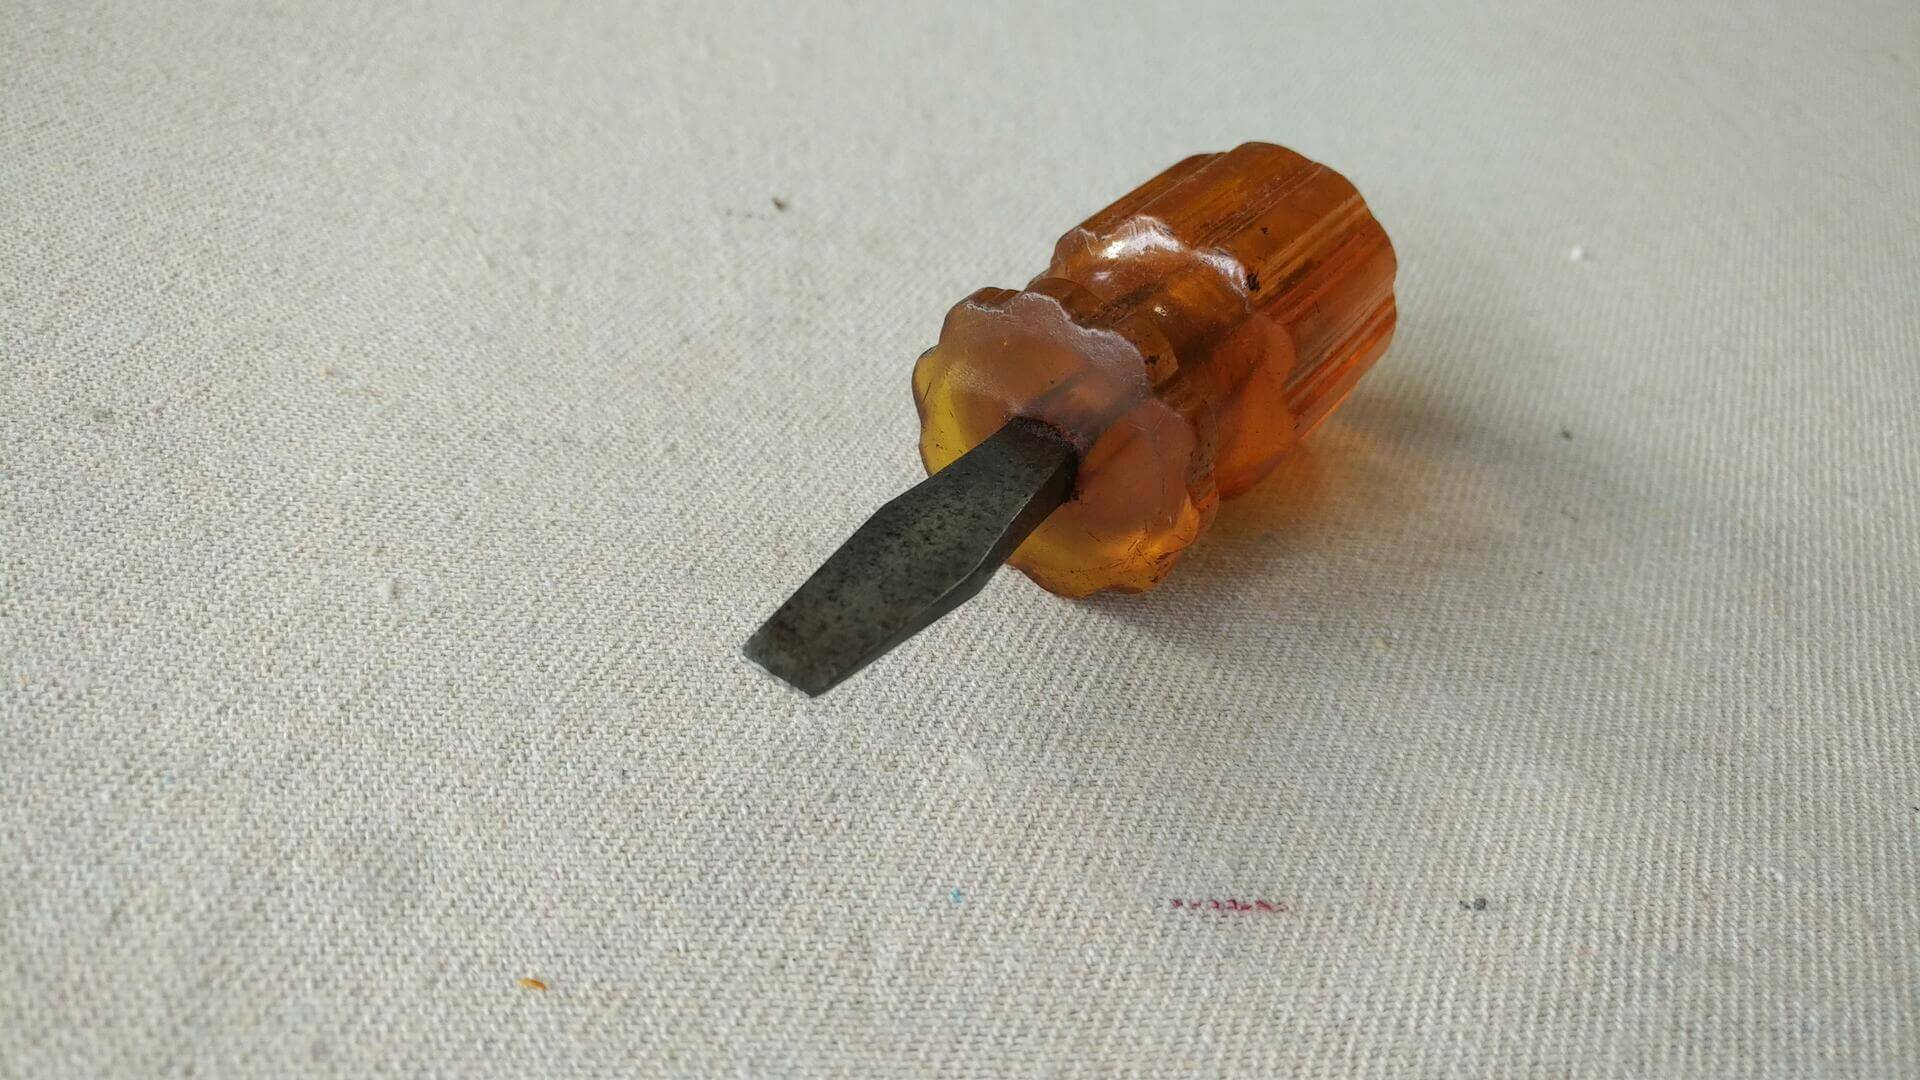 Rare vintage Miller Falls Company No. 854 stubby slotted screwdriver with unbreakable handle 3.5" long. Antique quality made in USA collectible hand tools